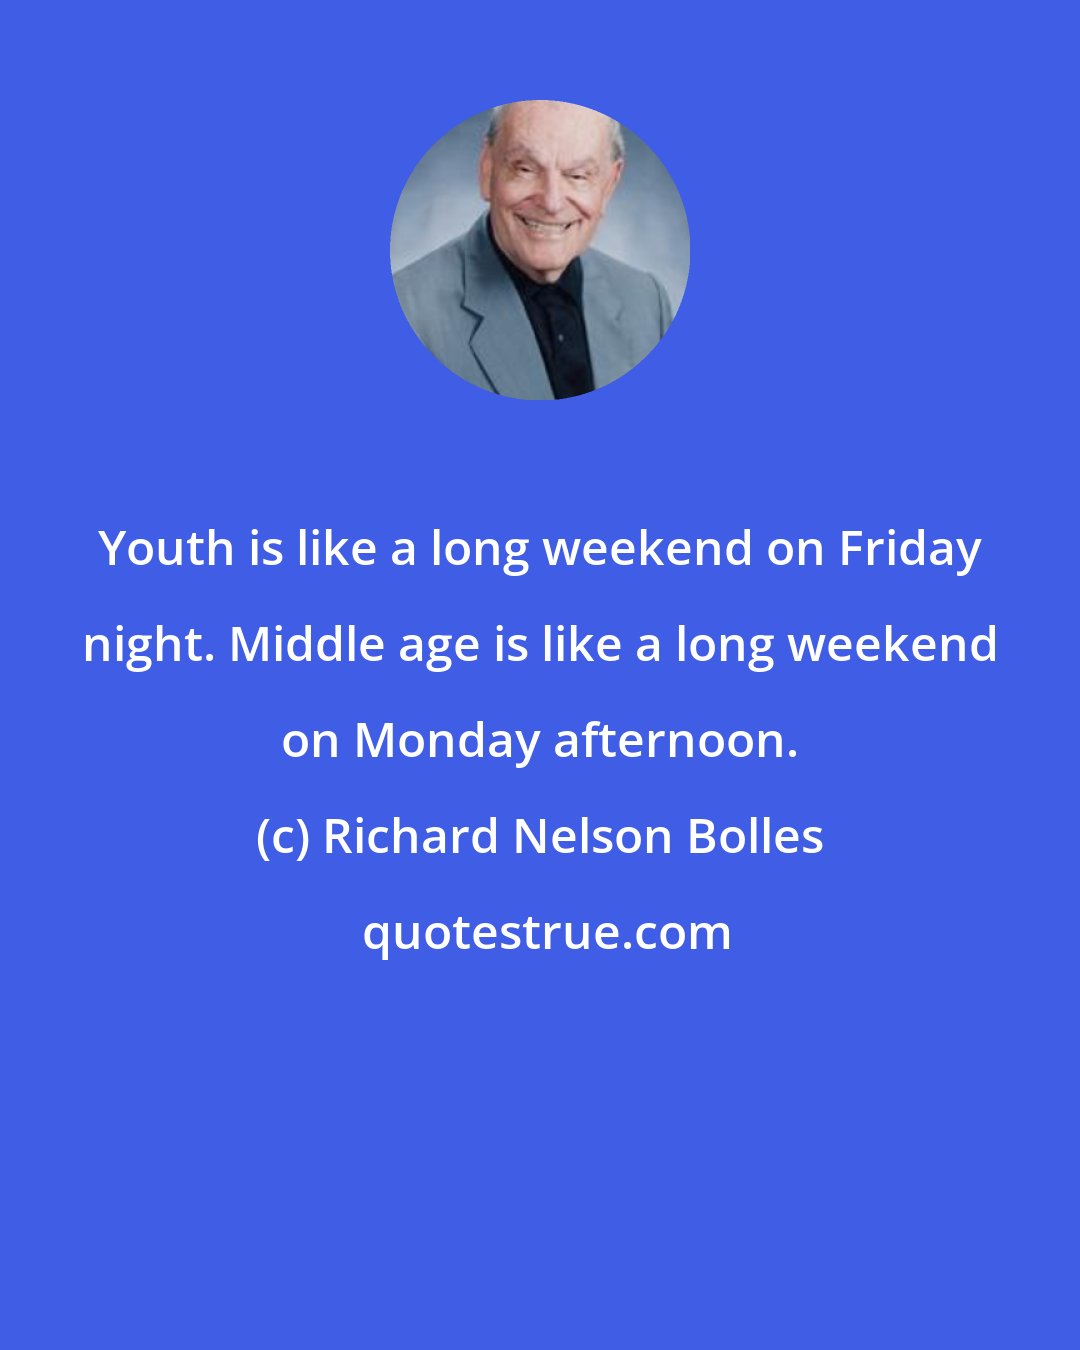 Richard Nelson Bolles: Youth is like a long weekend on Friday night. Middle age is like a long weekend on Monday afternoon.